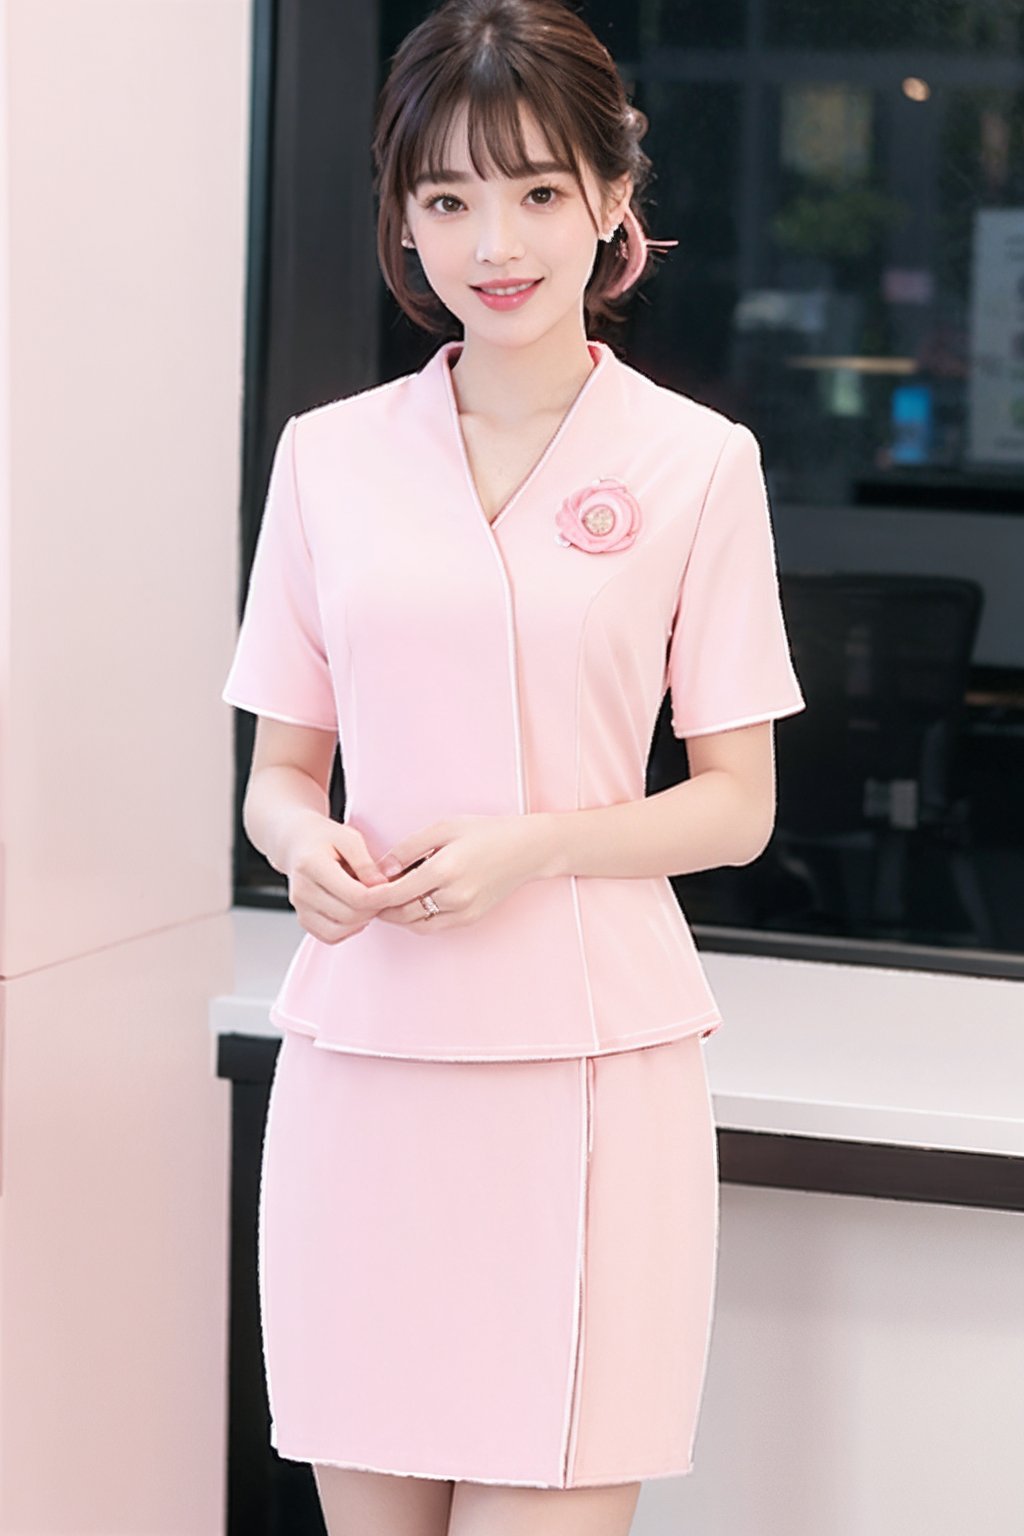 HDR,UHD,8K,best quality,masterpiece,Highly detailed,Studio lighting,ultra-fine painting,sharp focus,physically-based rendering,extreme detail description,Professional,masterpiece, best quality,delicate,beautiful,(1girl:2),(pink office_lady_uniform:1.5),(looking_at_viewer:1.2), realistic,(blunt bangs:1.2),(standing:1),office background,(Half-length photo:1),(smile:1),